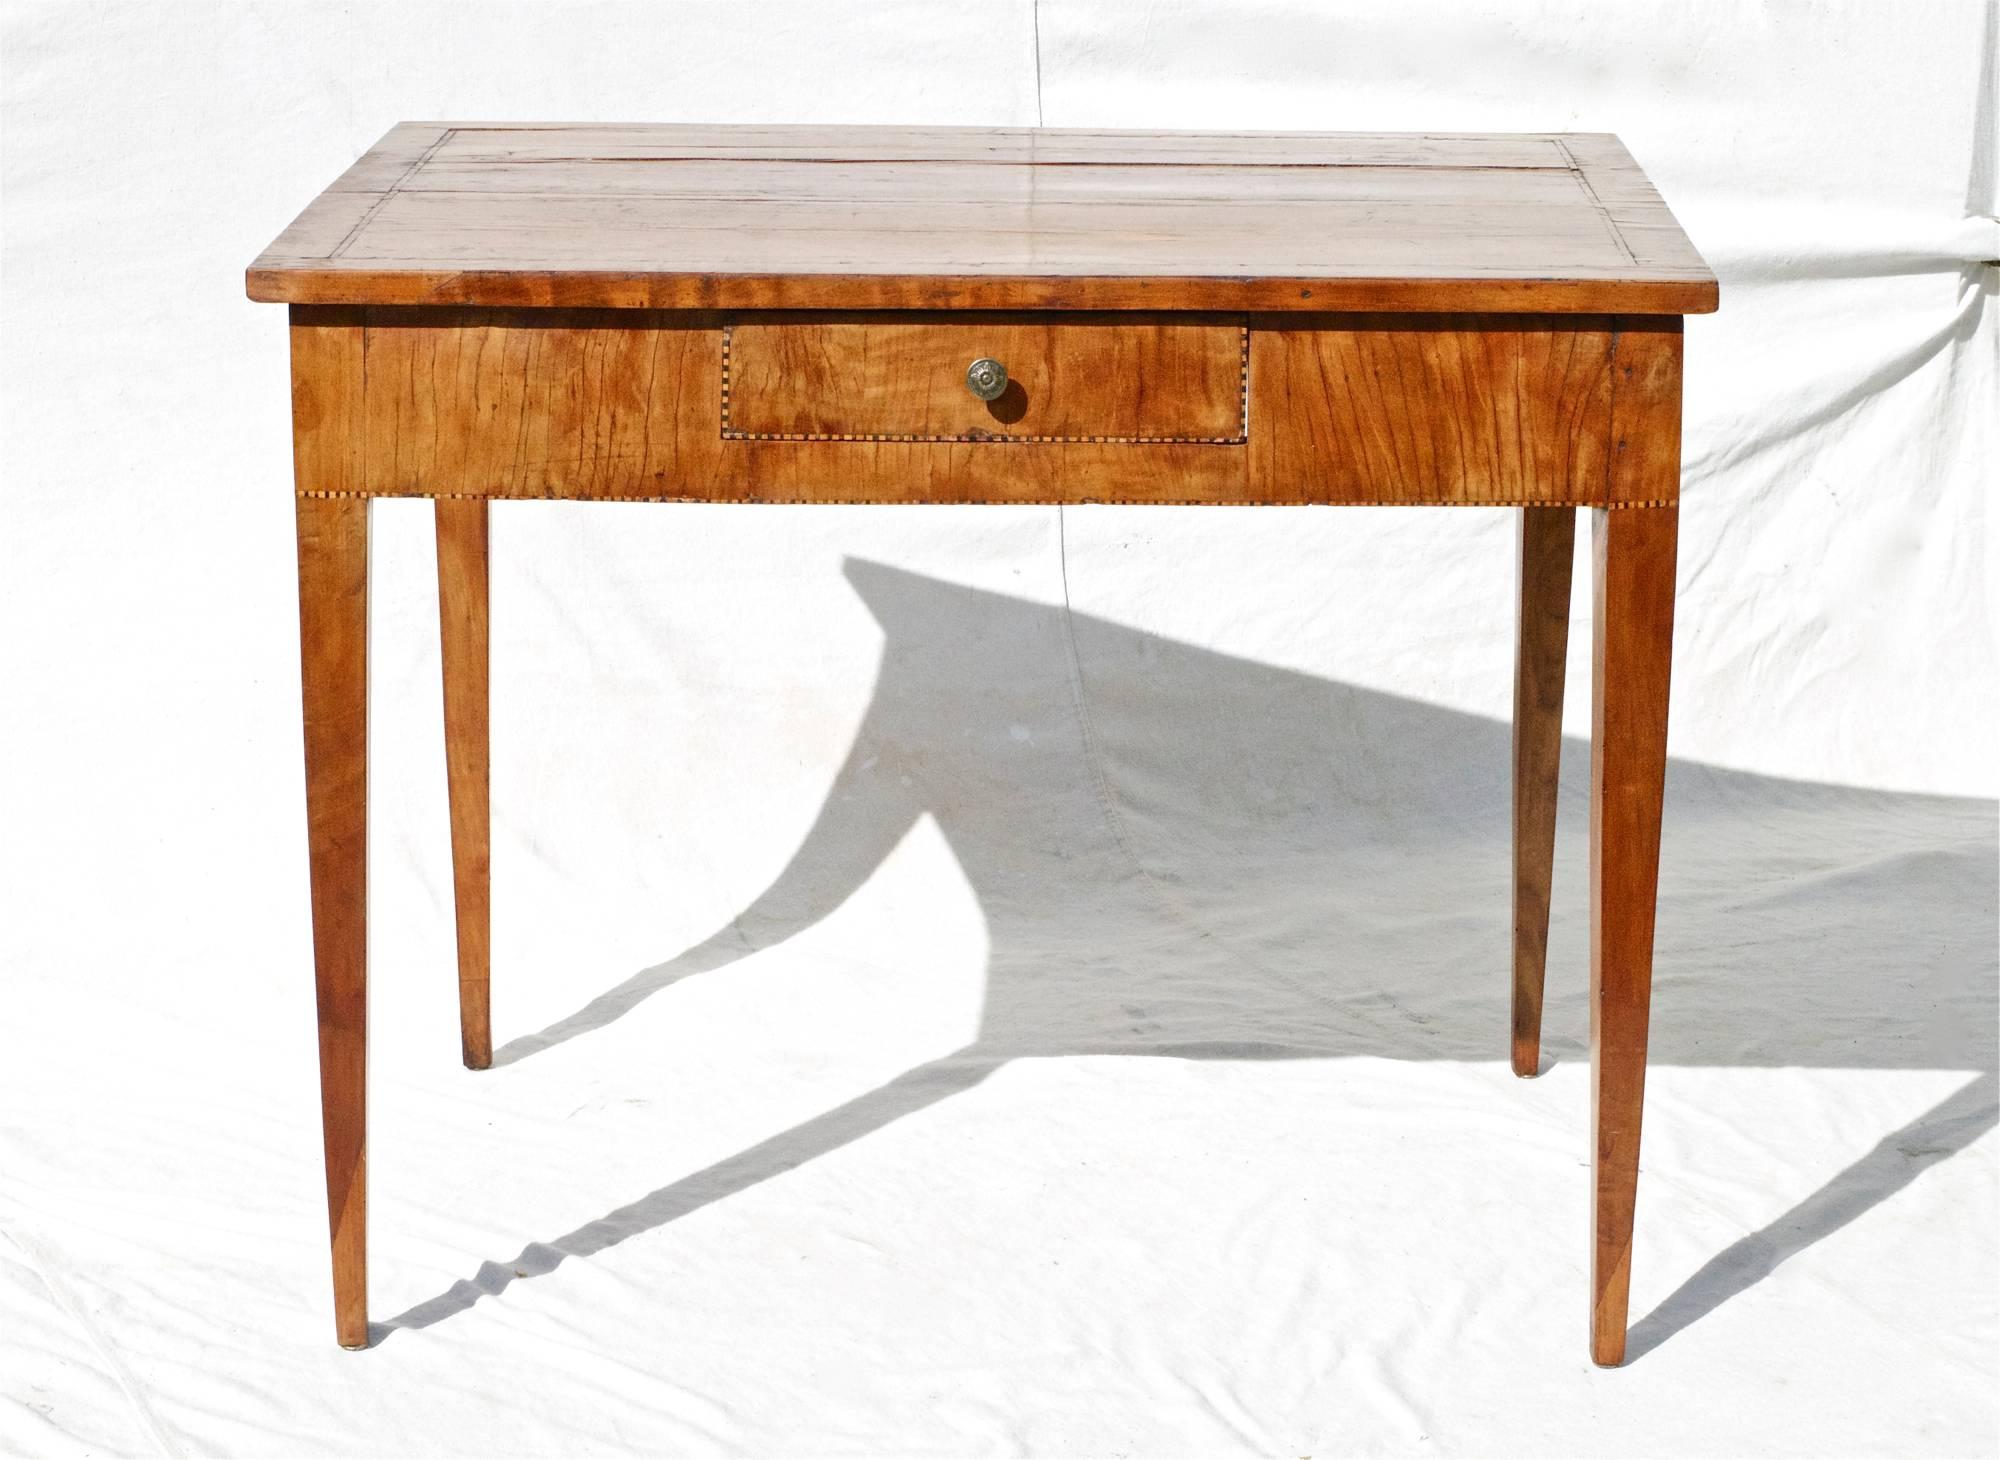 Late 18th century Italian writing or centre table with stunning good looks. The rectangular top shows many repairs along the way and is gently supported by tapering legs of a graceful proportion. The table is outlined throughout with a simple